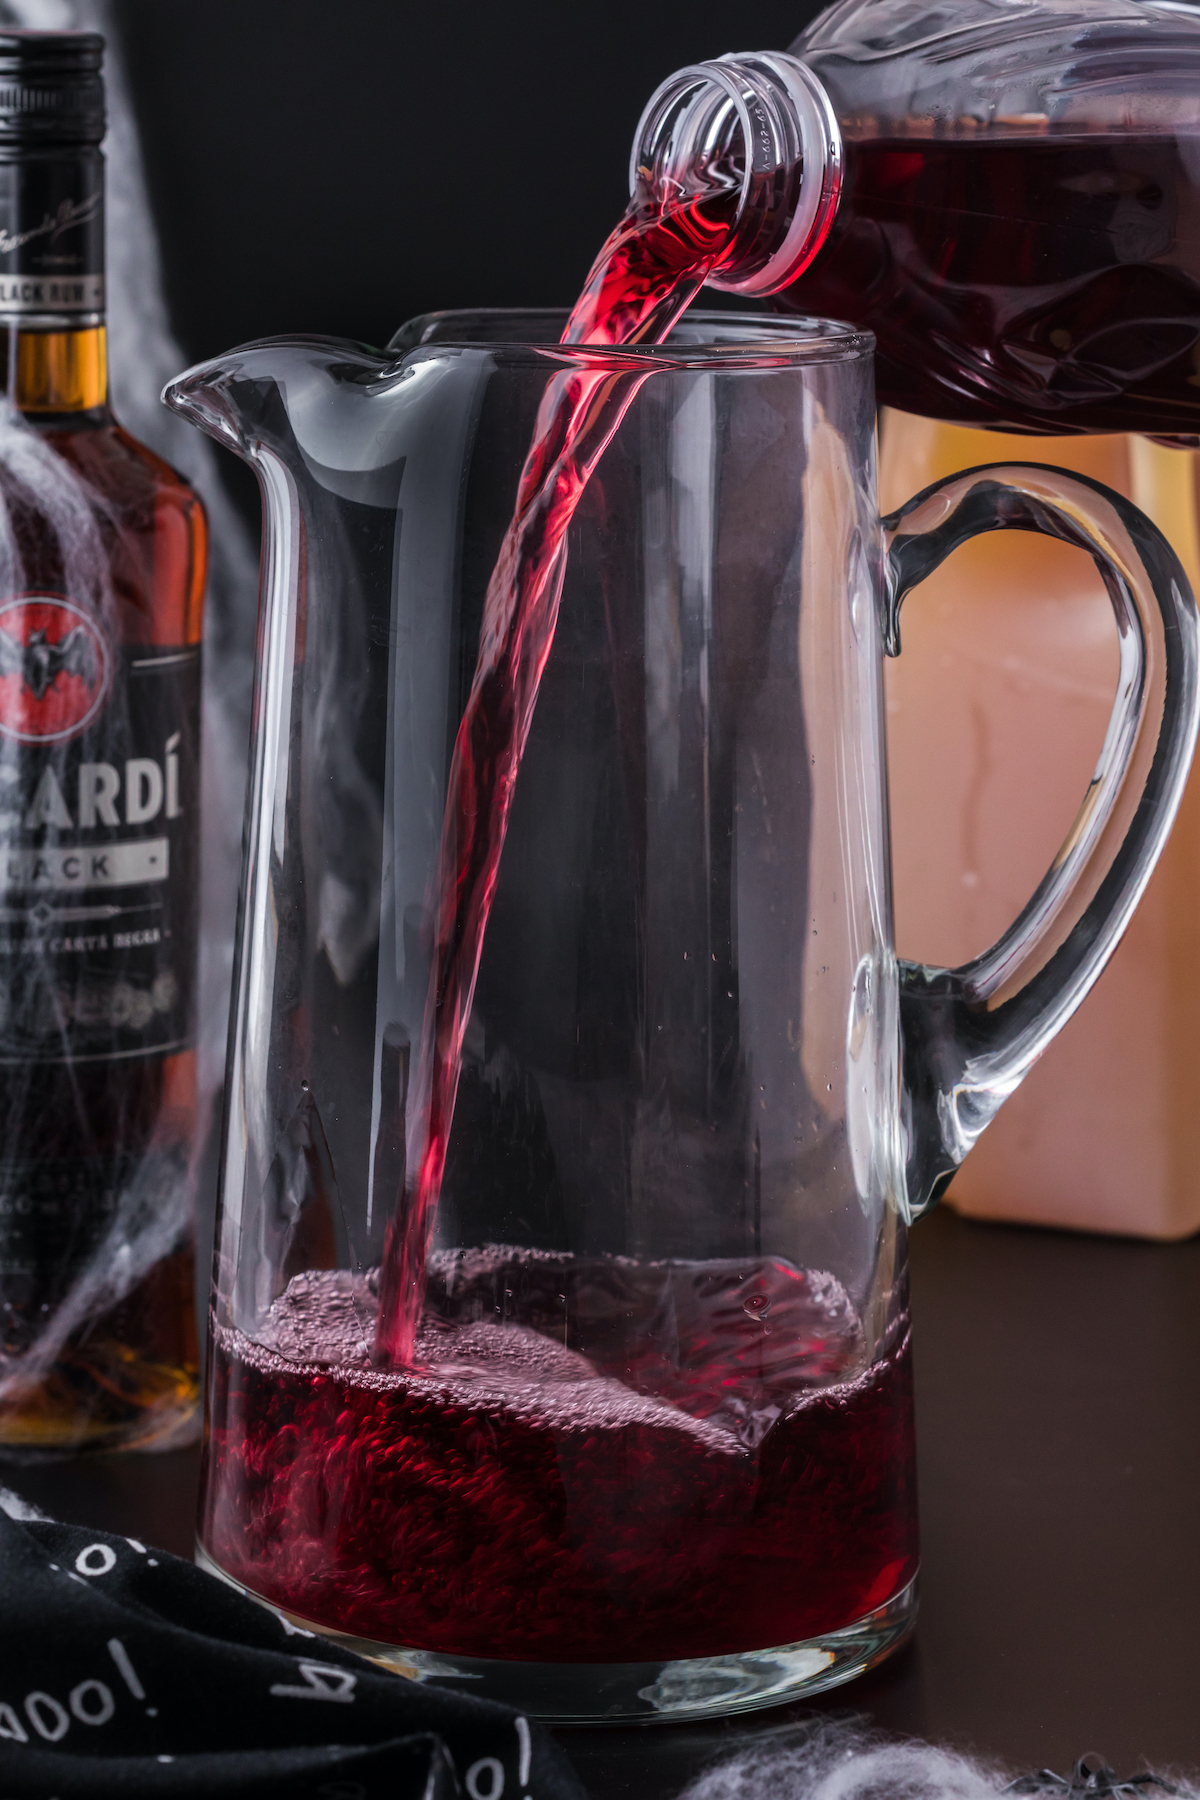 A tall glass pitched being filled with cran-grape juice.